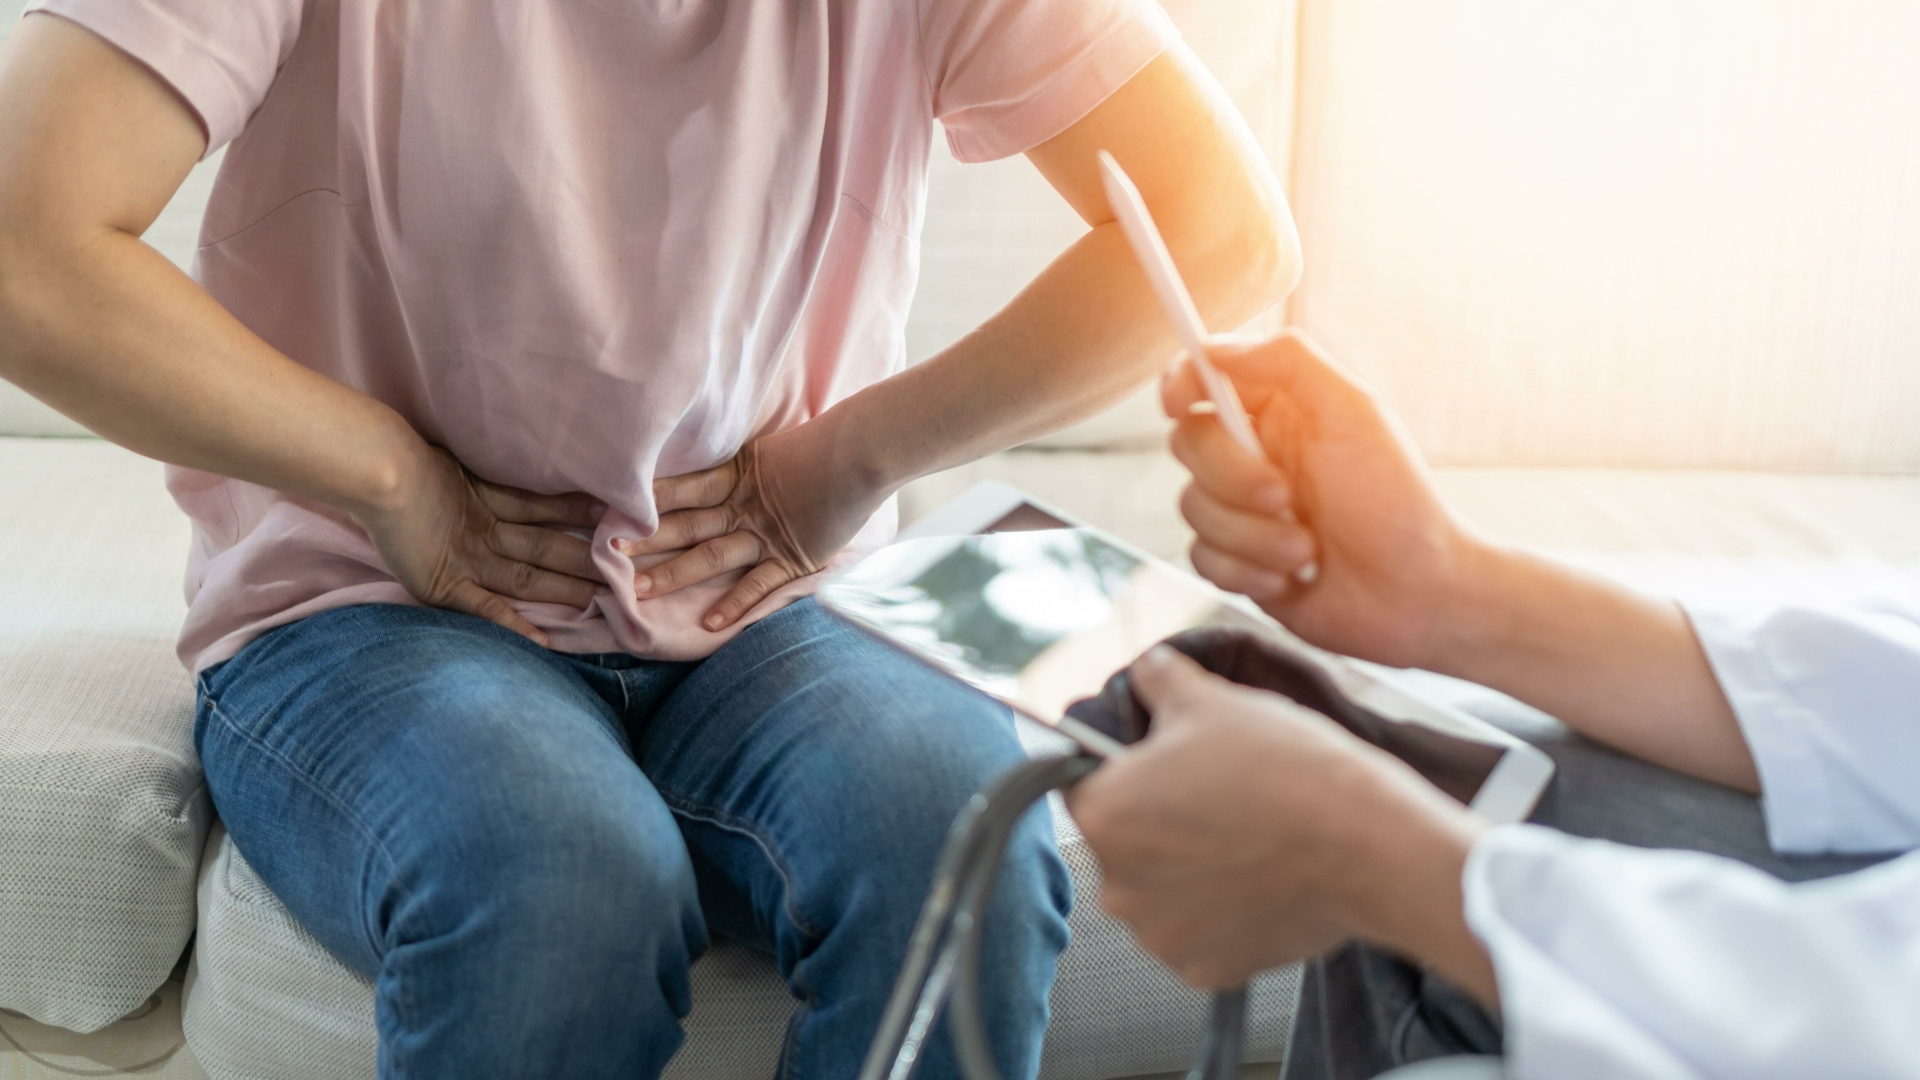 New insights into chronic gut pain offer hope of irritable bowel syndrome and anxiety treatment